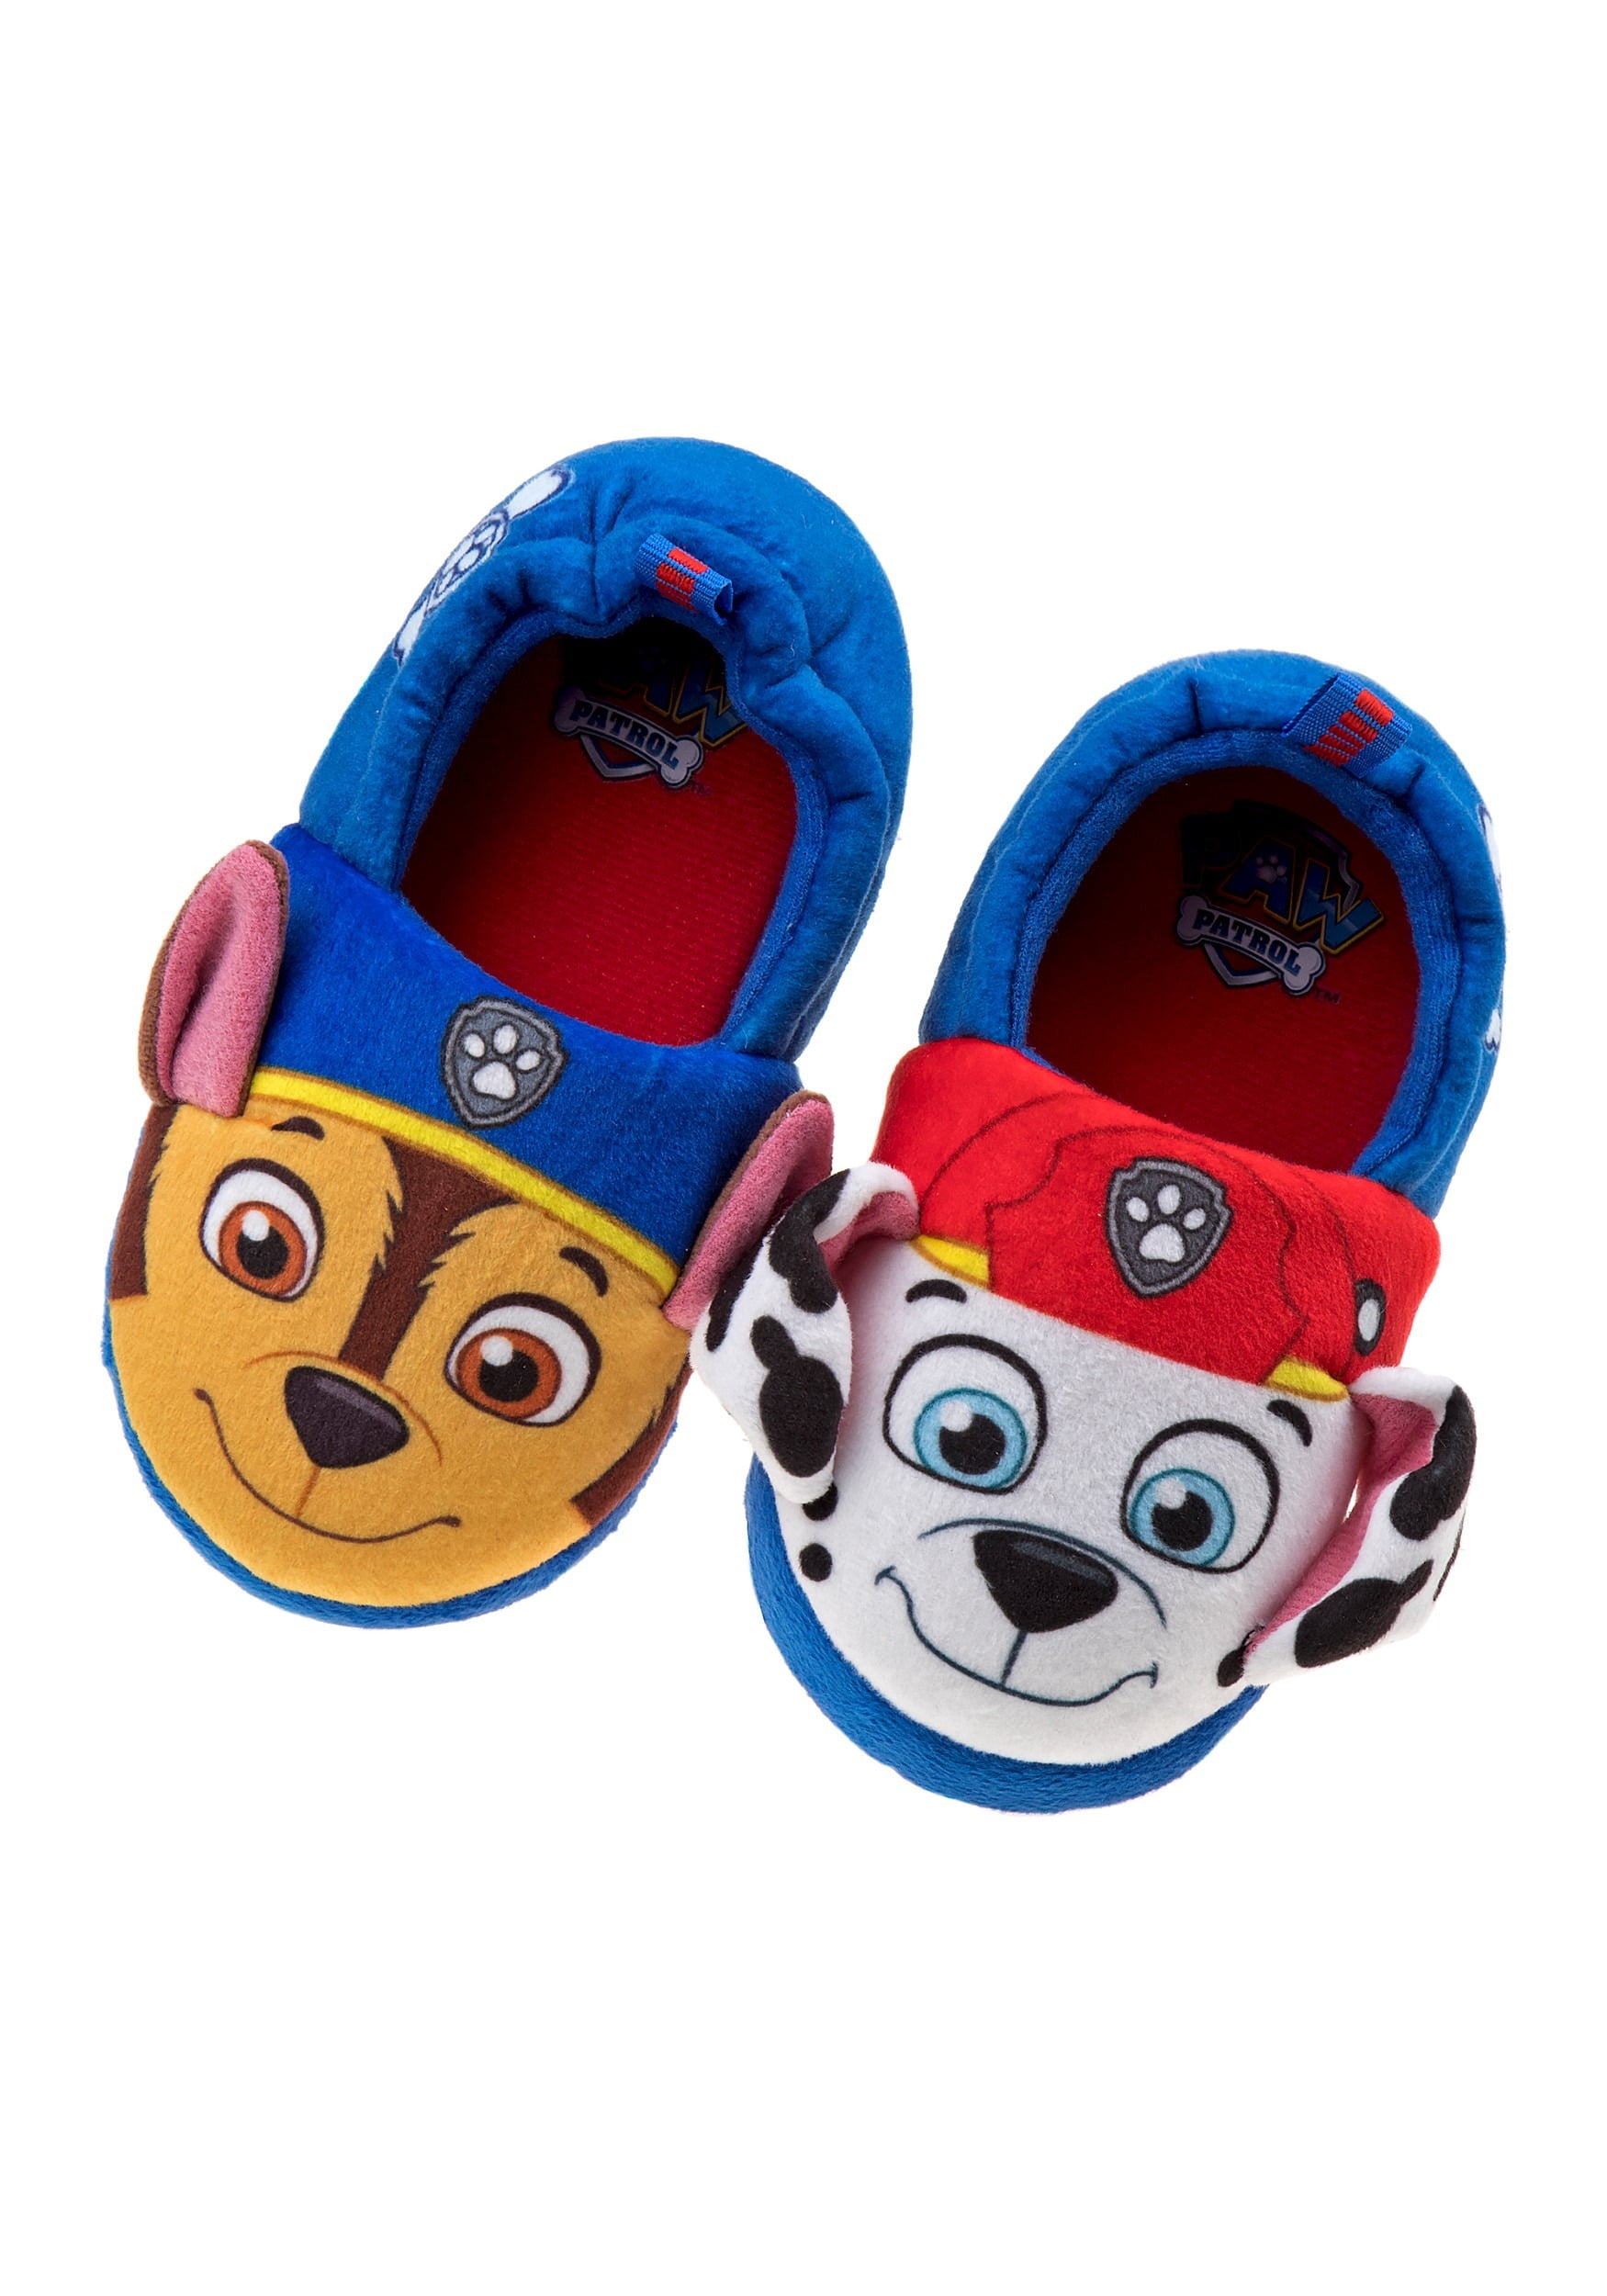 Paw Patrol Rubble 3D Plush Kids Toddlers Slippers Non Slip Sole Size 10.5-12